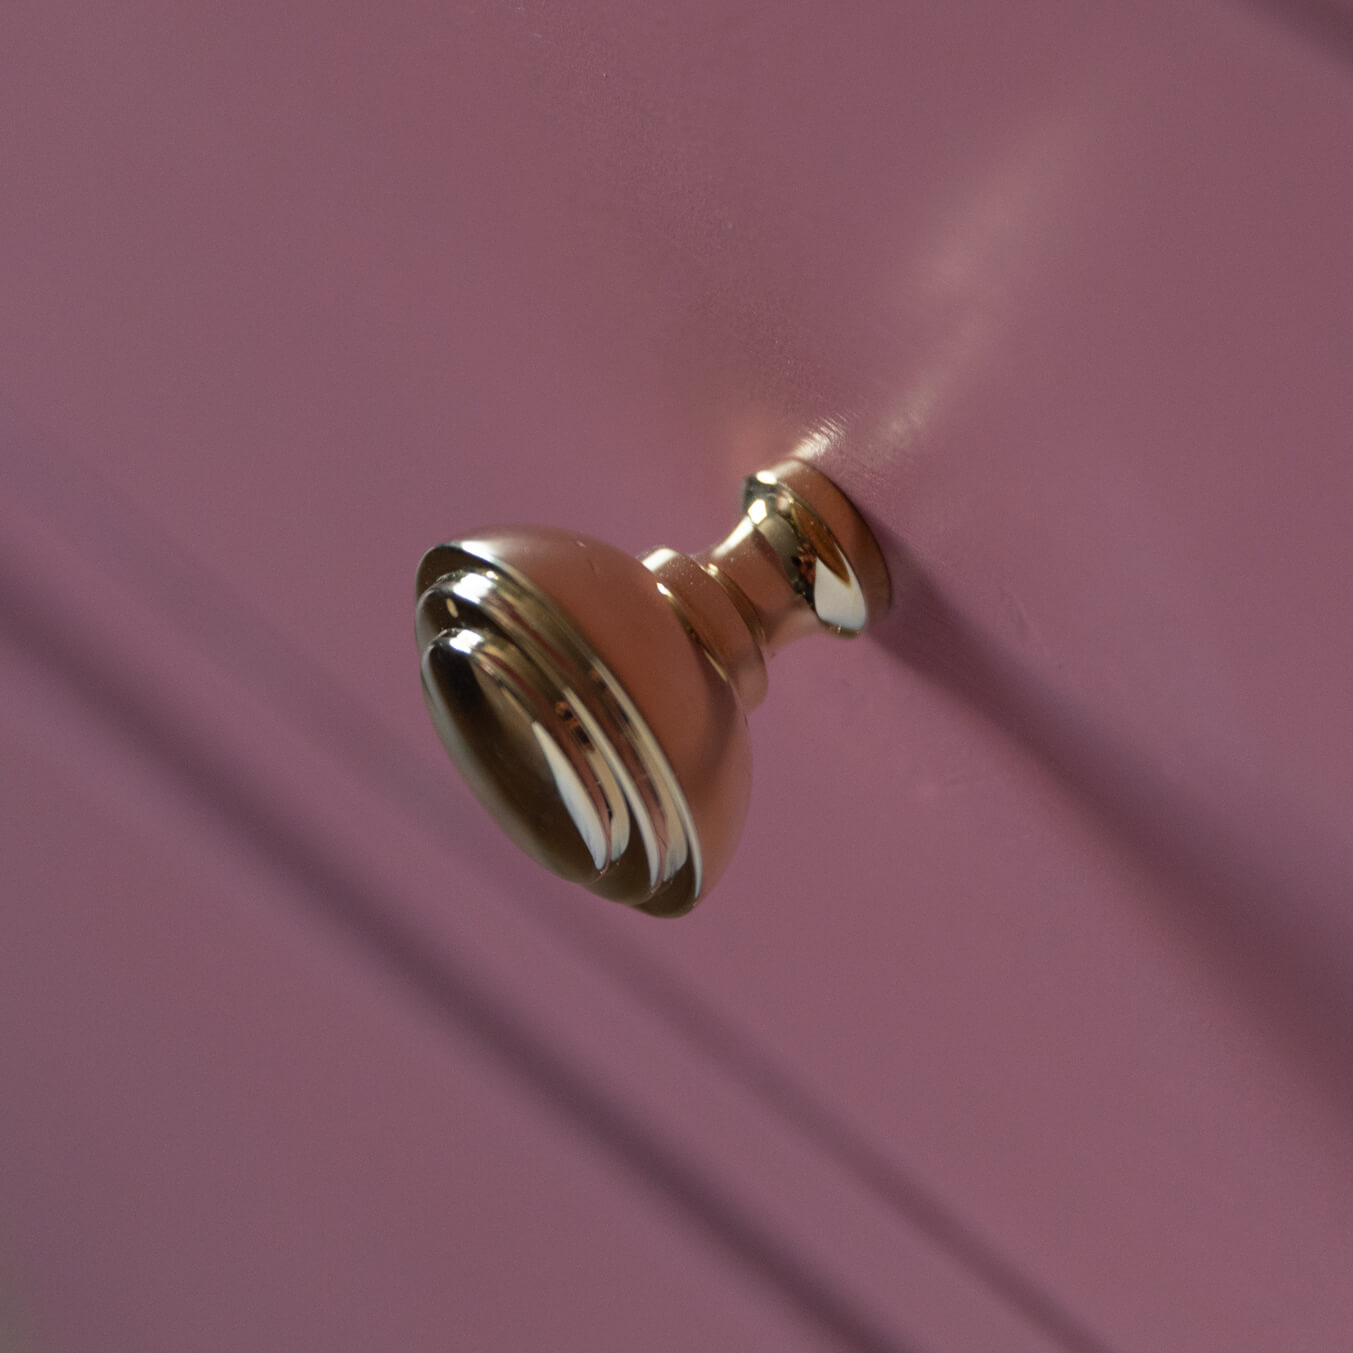 Ribbed Brass Cabinet Knobs seen on pink chest of drawers detail